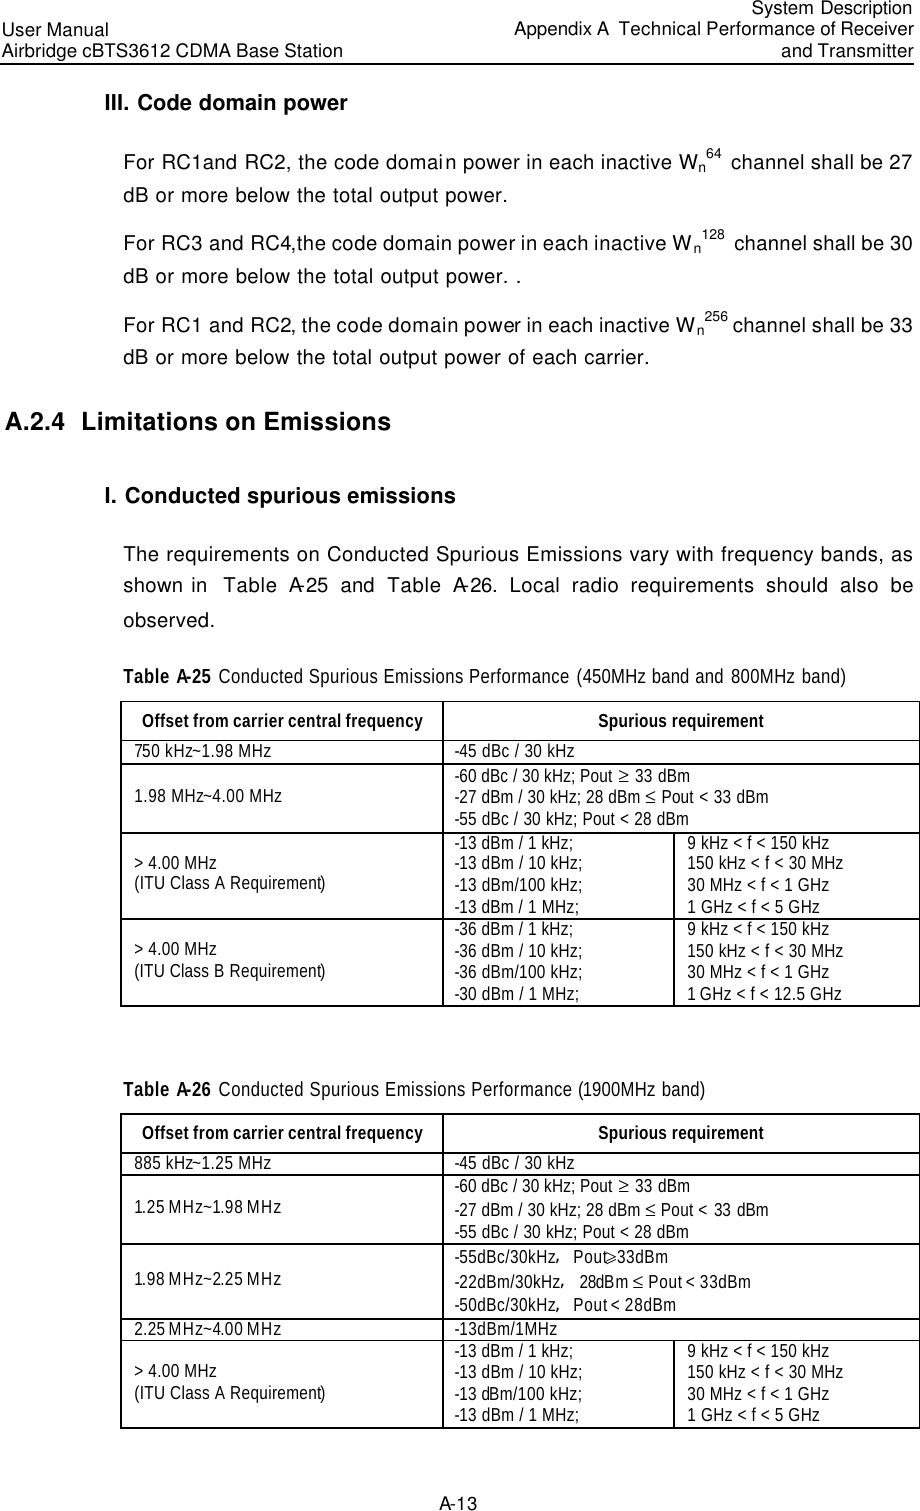 User Manual Airbridge cBTS3612 CDMA Base Station  System DescriptionAppendix A  Technical Performance of Receiver and Transmitter A-13 III. Code domain power  For RC1and RC2, the code domain power in each inactive Wn64  channel shall be 27 dB or more below the total output power.   For RC3 and RC4,the code domain power in each inactive Wn128  channel shall be 30 dB or more below the total output power. . For RC1 and RC2, the code domain power in each inactive Wn256 channel shall be 33 dB or more below the total output power of each carrier. A.2.4  Limitations on Emissions  I. Conducted spurious emissions  The requirements on Conducted Spurious Emissions vary with frequency bands, as shown in  Table A-25 and Table A-26. Local radio requirements should also be observed.  Table A-25 Conducted Spurious Emissions Performance (450MHz band and 800MHz band) Offset from carrier central frequency Spurious requirement 750 kHz~1.98 MHz -45 dBc / 30 kHz 1.98 MHz~4.00 MHz -60 dBc / 30 kHz; Pout ≥ 33 dBm -27 dBm / 30 kHz; 28 dBm ≤ Pout &lt; 33 dBm -55 dBc / 30 kHz; Pout &lt; 28 dBm &gt; 4.00 MHz  (ITU Class A Requirement) -13 dBm / 1 kHz; -13 dBm / 10 kHz; -13 dBm/100 kHz; -13 dBm / 1 MHz; 9 kHz &lt; f &lt; 150 kHz 150 kHz &lt; f &lt; 30 MHz 30 MHz &lt; f &lt; 1 GHz 1 GHz &lt; f &lt; 5 GHz &gt; 4.00 MHz  (ITU Class B Requirement) -36 dBm / 1 kHz; -36 dBm / 10 kHz; -36 dBm/100 kHz; -30 dBm / 1 MHz; 9 kHz &lt; f &lt; 150 kHz 150 kHz &lt; f &lt; 30 MHz 30 MHz &lt; f &lt; 1 GHz 1 GHz &lt; f &lt; 12.5 GHz  Table A-26 Conducted Spurious Emissions Performance (1900MHz band) Offset from carrier central frequency Spurious requirement 885 kHz~1.25 MHz -45 dBc / 30 kHz 1.25 MHz~1.98 MHz -60 dBc / 30 kHz; Pout ≥ 33 dBm -27 dBm / 30 kHz; 28 dBm ≤ Pout &lt; 33 dBm -55 dBc / 30 kHz; Pout &lt; 28 dBm 1.98 MHz~2.25 MHz -55dBc/30kHz，　Pout¦33dBm -22dBm/30kHz，　28dBm ≤ Pout &lt; 33dBm -50dBc/30kHz，　Pout &lt; 28dBm 2.25 MHz~4.00 MHz -13dBm/1MHz &gt; 4.00 MHz  (ITU Class A Requirement) -13 dBm / 1 kHz; -13 dBm / 10 kHz; -13 dBm/100 kHz; -13 dBm / 1 MHz; 9 kHz &lt; f &lt; 150 kHz 150 kHz &lt; f &lt; 30 MHz 30 MHz &lt; f &lt; 1 GHz 1 GHz &lt; f &lt; 5 GHz 